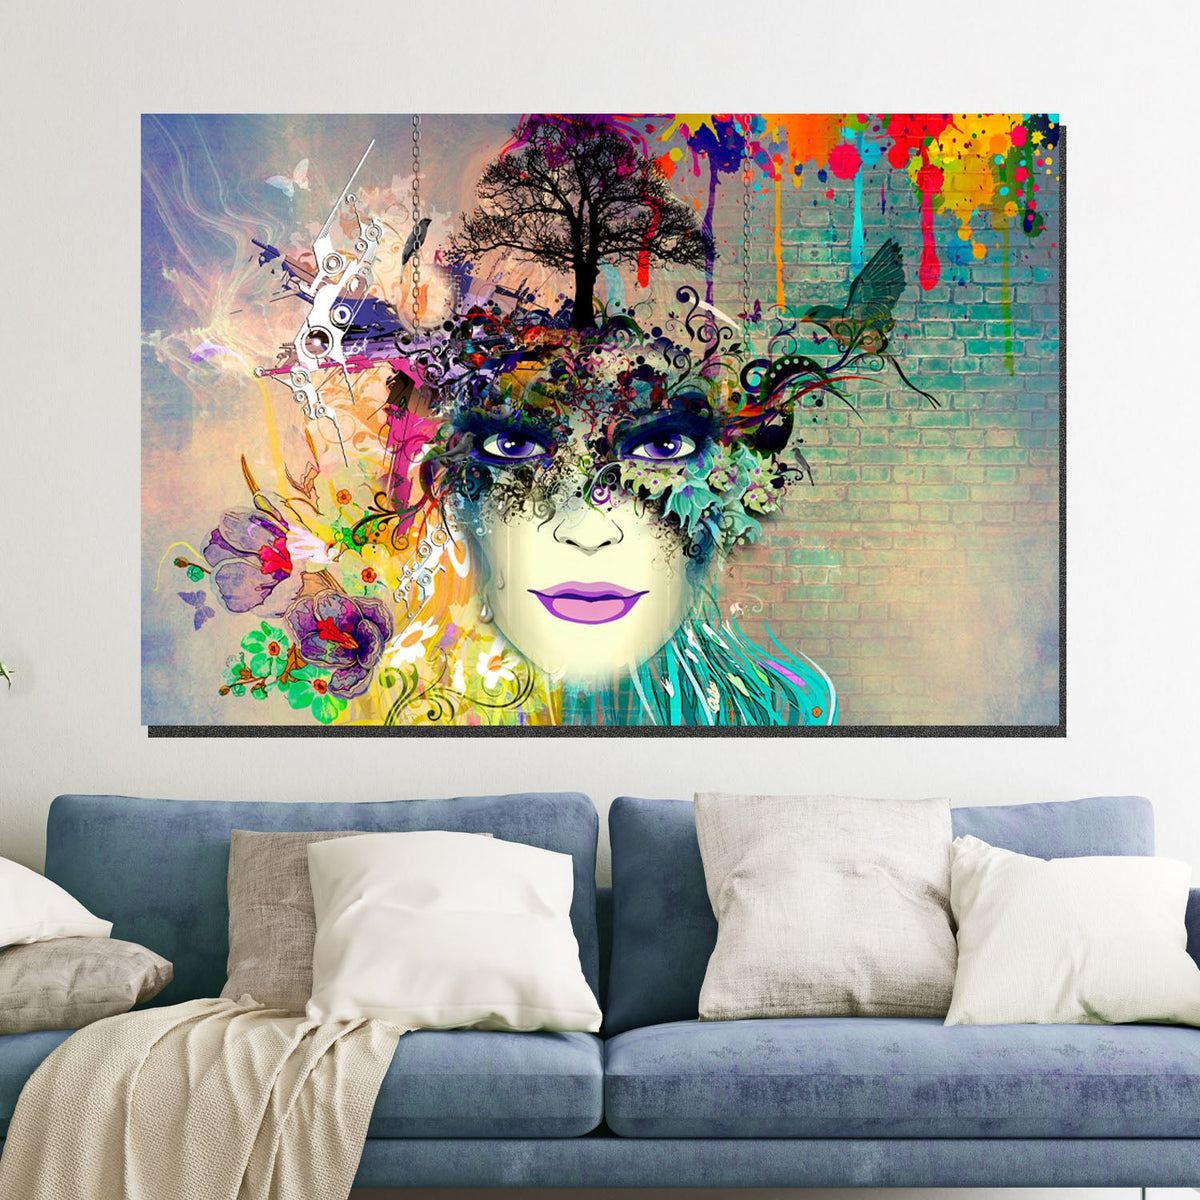 https://cdn.shopify.com/s/files/1/0387/9986/8044/products/AbstractPortraitofaWomanCanvasArtPrintStretched-2.jpg